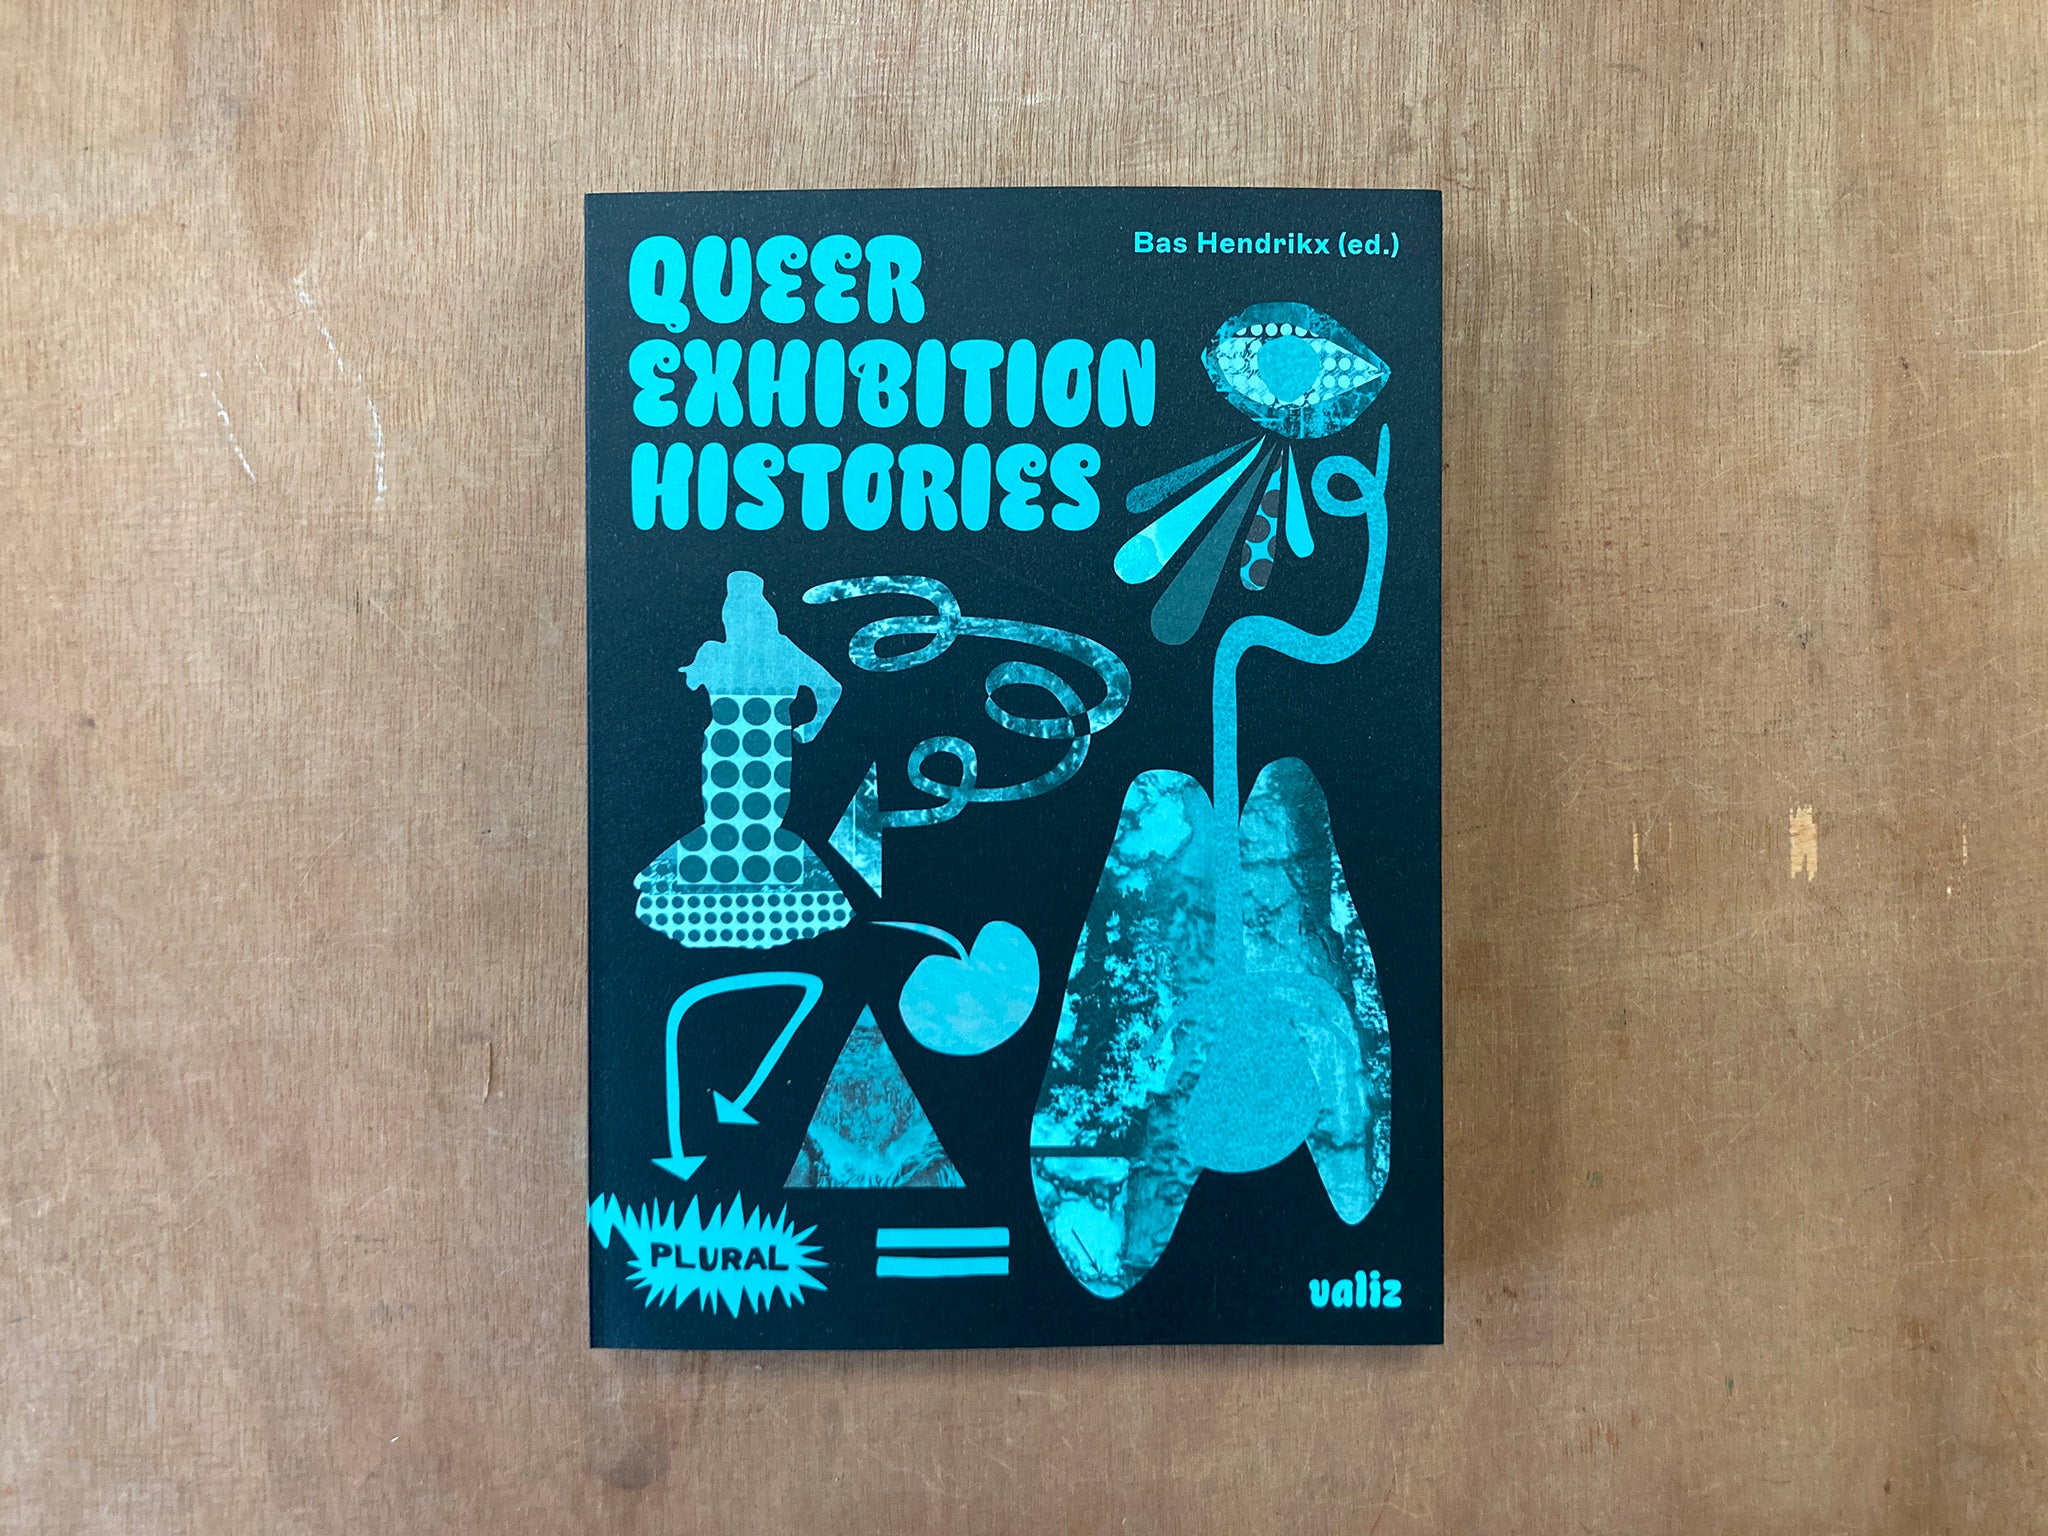 QUEER EXHIBITION HISTORIES edited by Bas Hendrikx